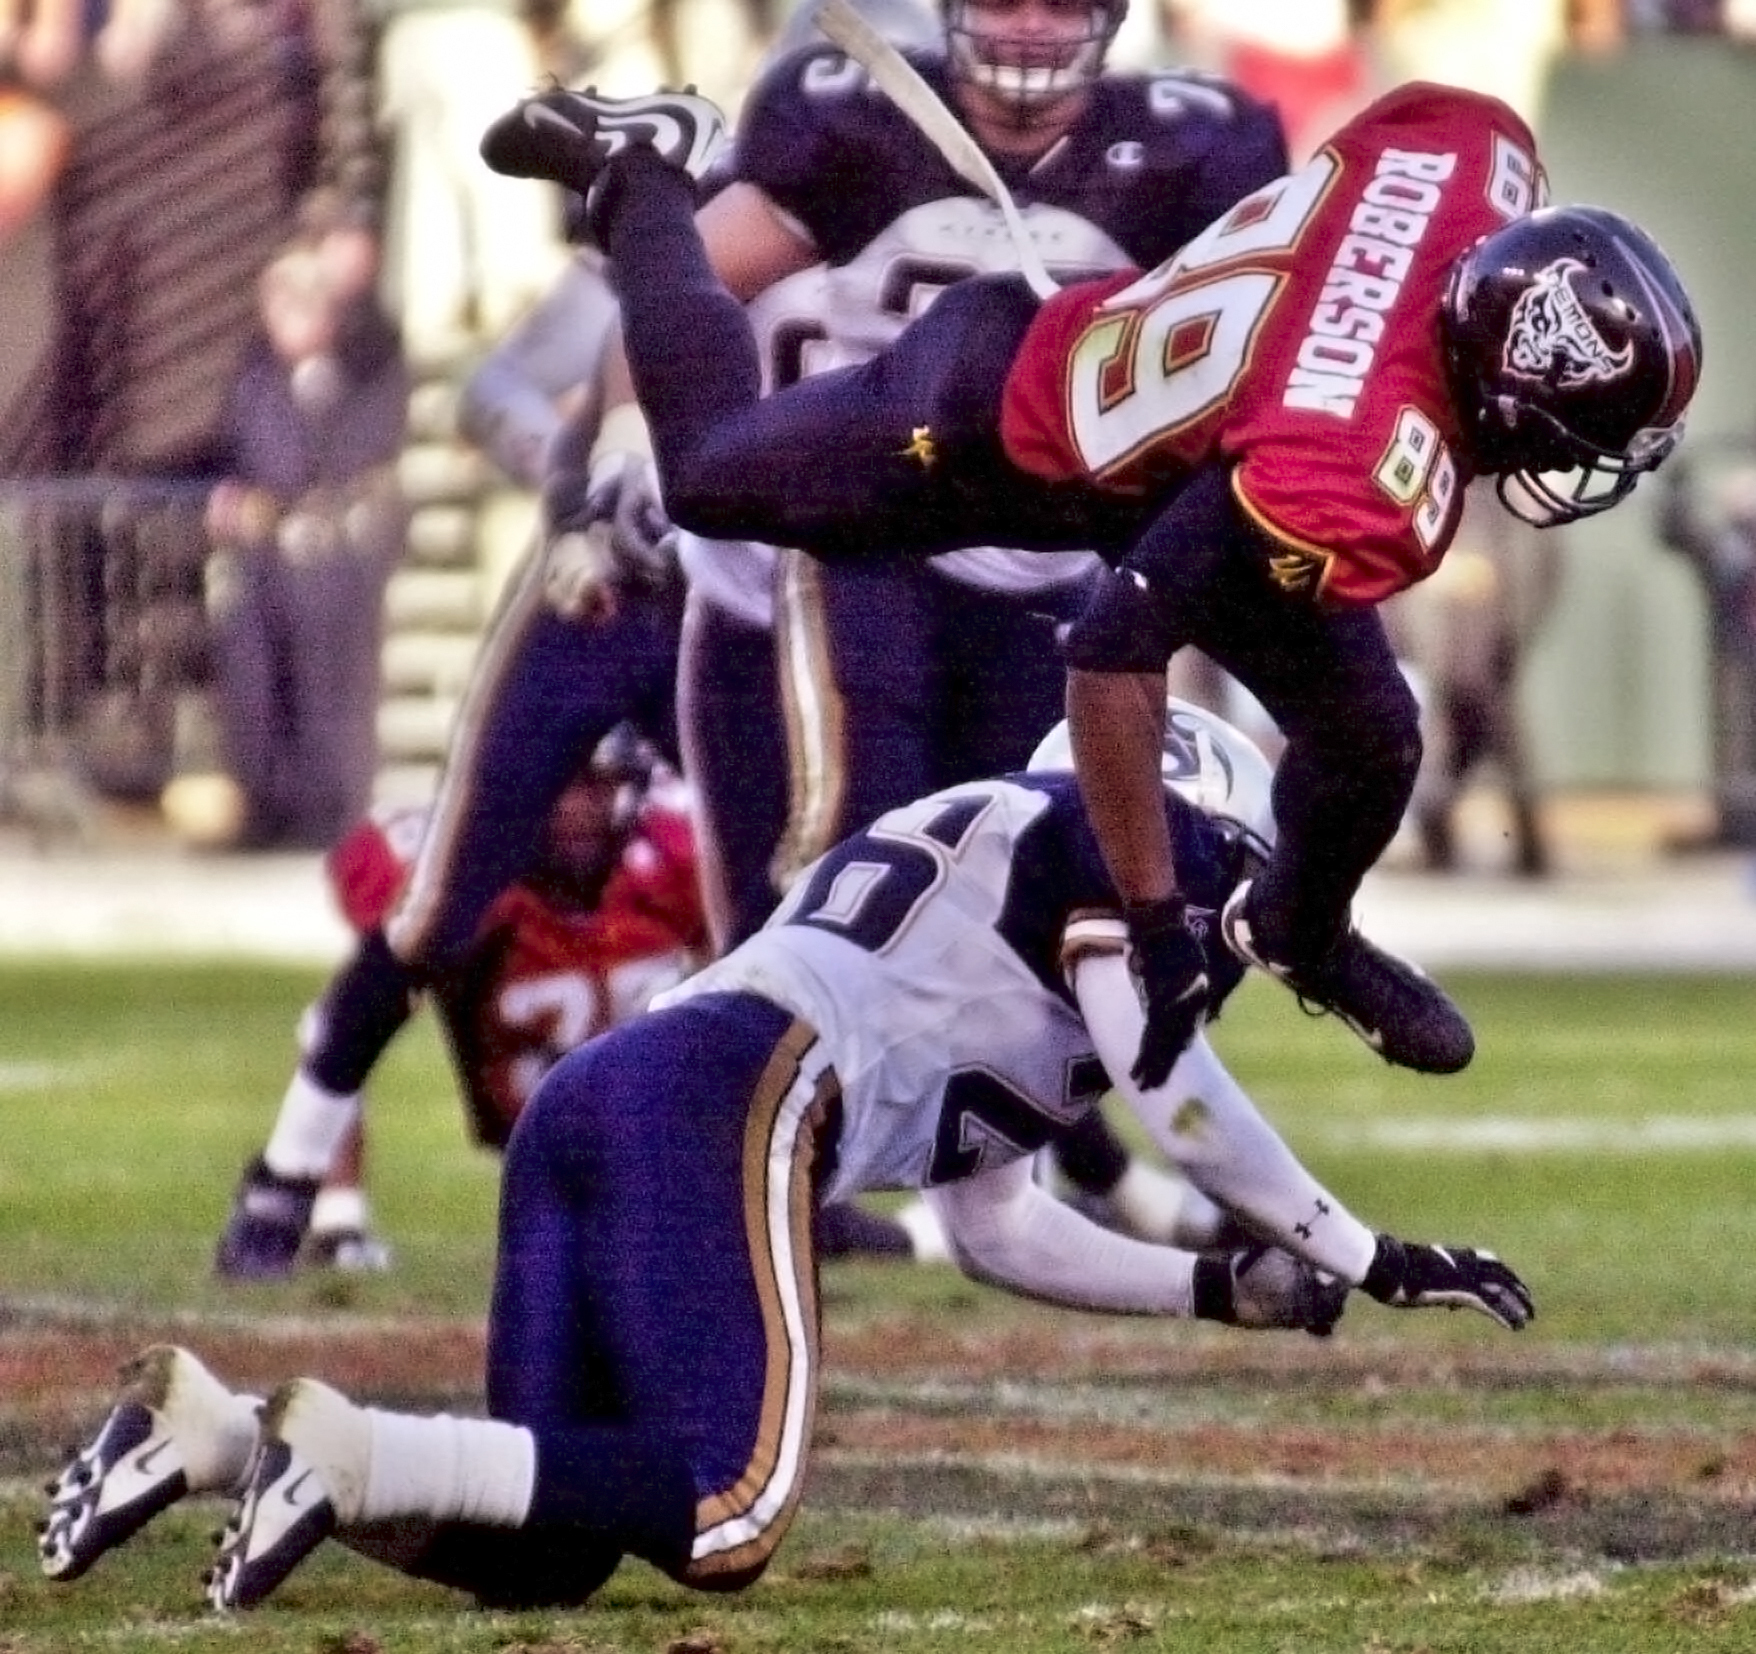 Two American football players during an XFL game